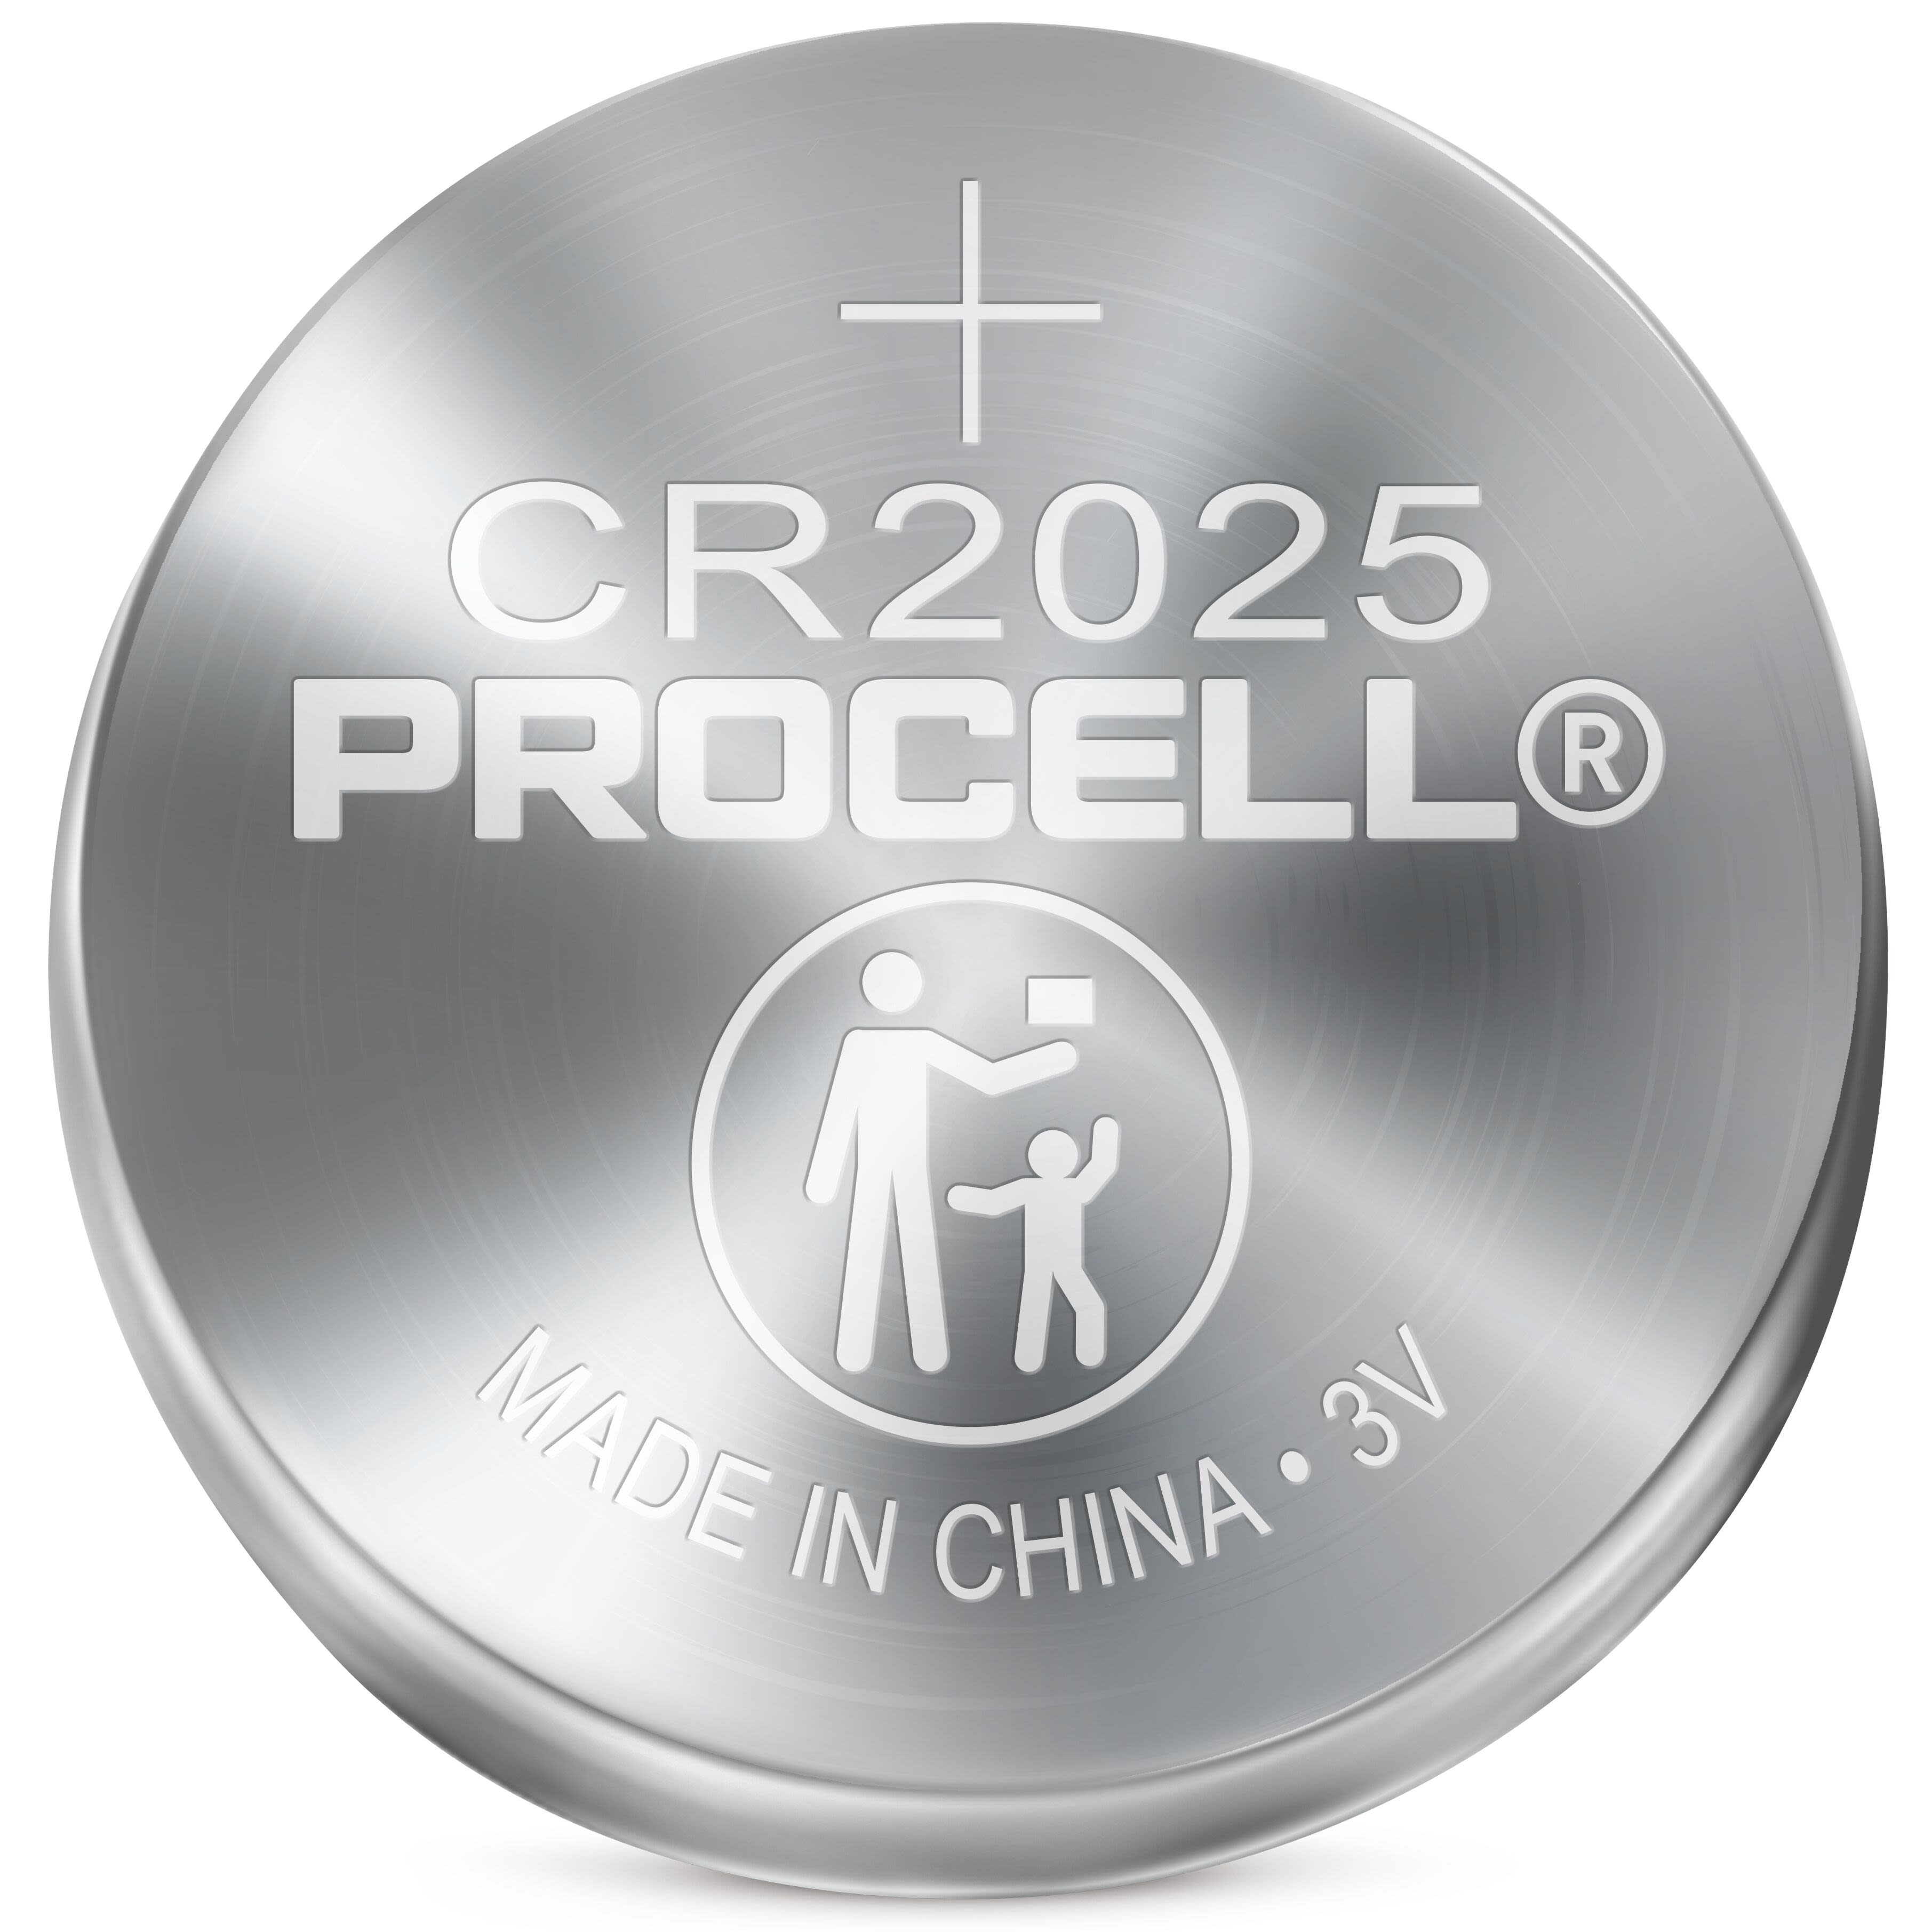 Duracell Procell CR2025 Button Battery, 3V